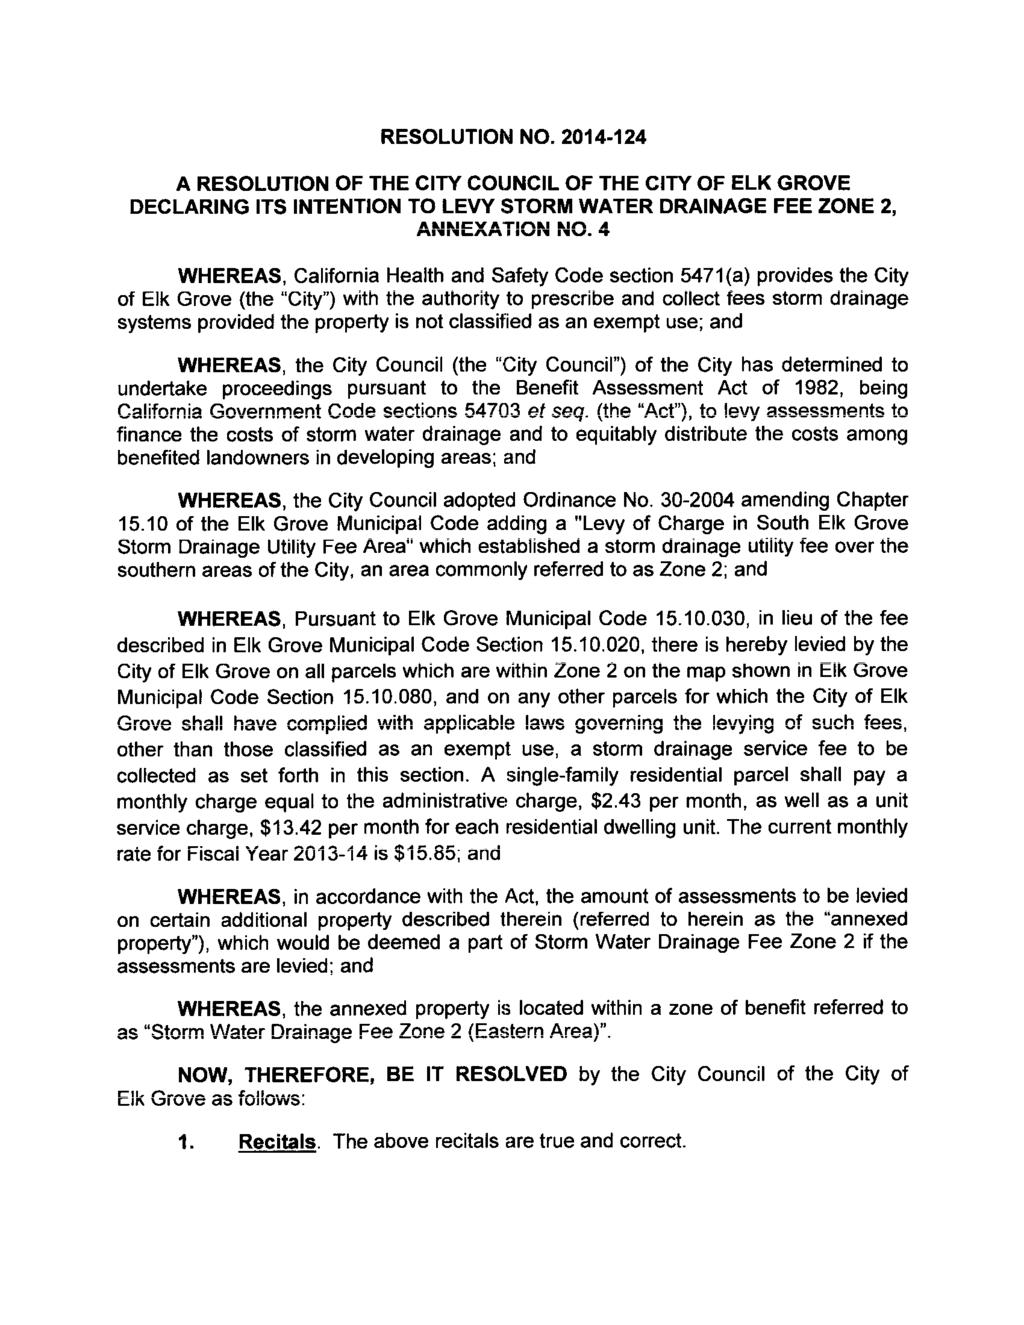 RESOLUTION NO. 2014-124 A RESOLUTION OF THE CITY COUNCIL OF THE CITY OF ELK GROVE DECLARING ITS INTENTION TO LEVY STORM WATER DRAINAGE FEE ZONE 2, At..Jt-..JEXATIOt..J t..jo.